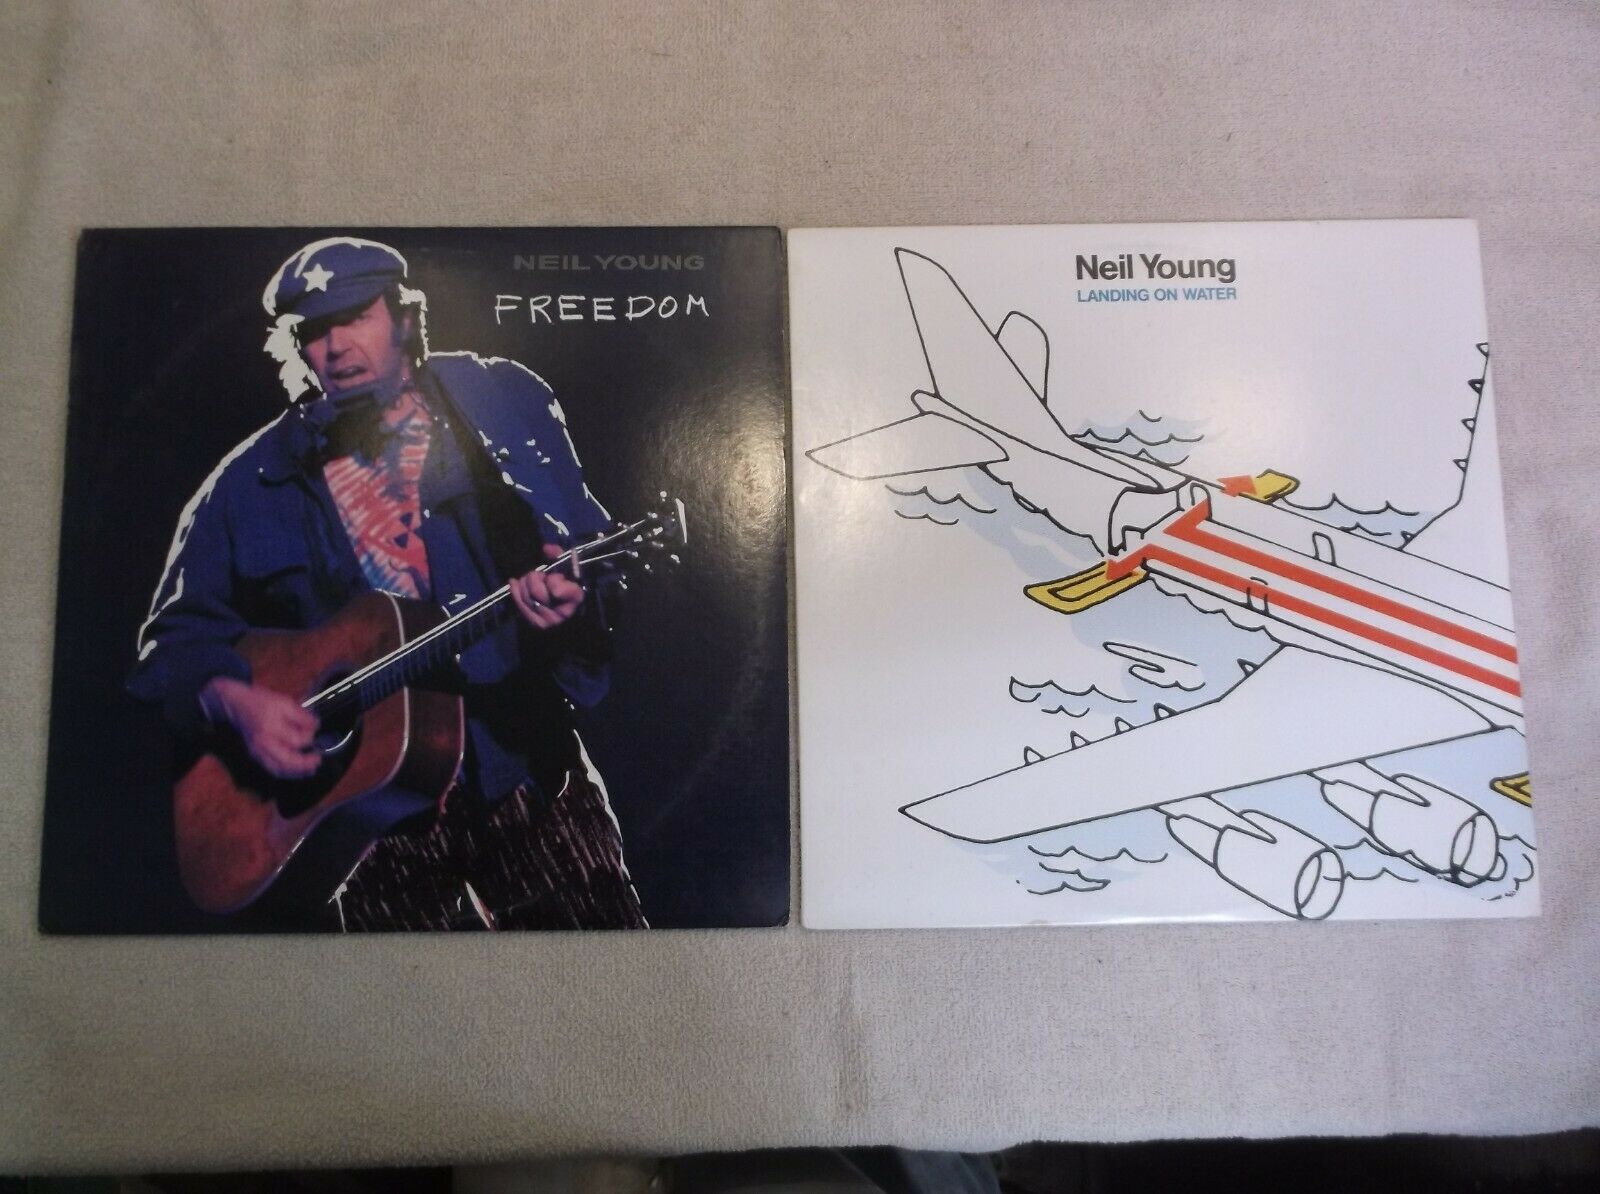 Pic 1 Neil Young, 1989 Freedom & 1986 Landing On Water, Vinyl Records.